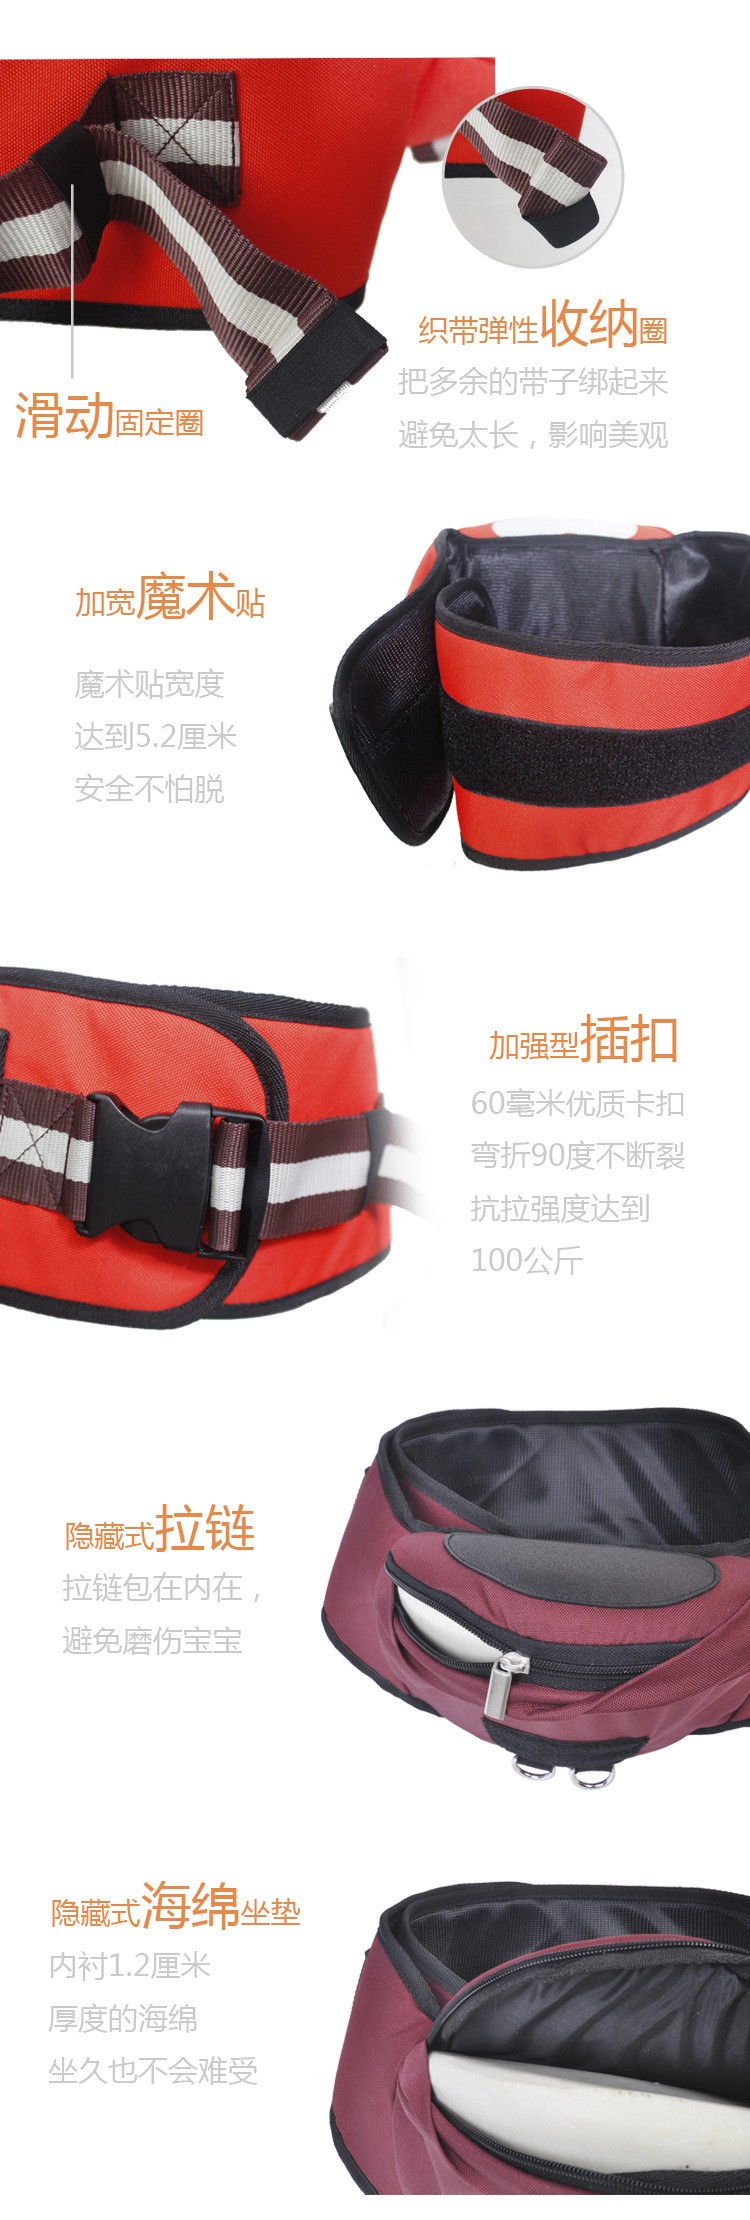 Baby Carrier (9)